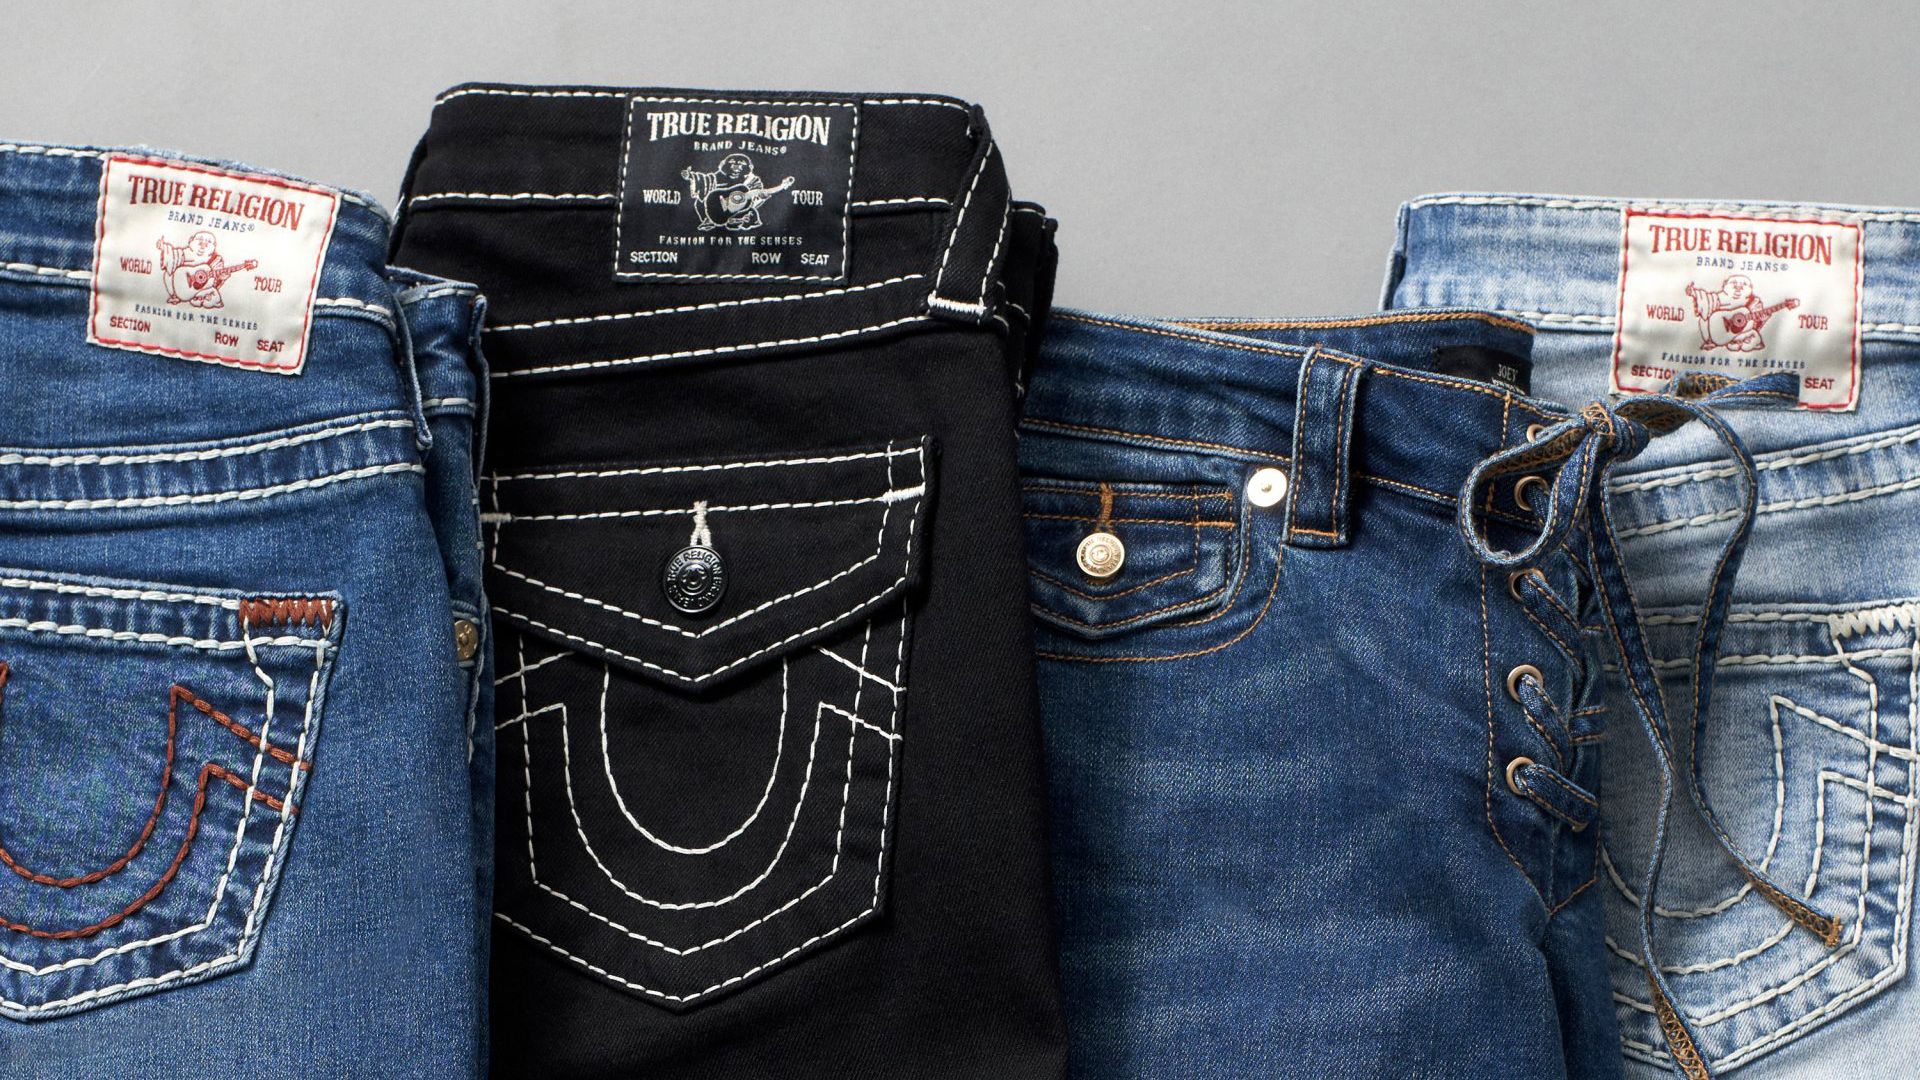 All The Levi's Tried & Compared: 501s, Wedgie Fit, Ribcage & 700 Series -  The Mom Edit